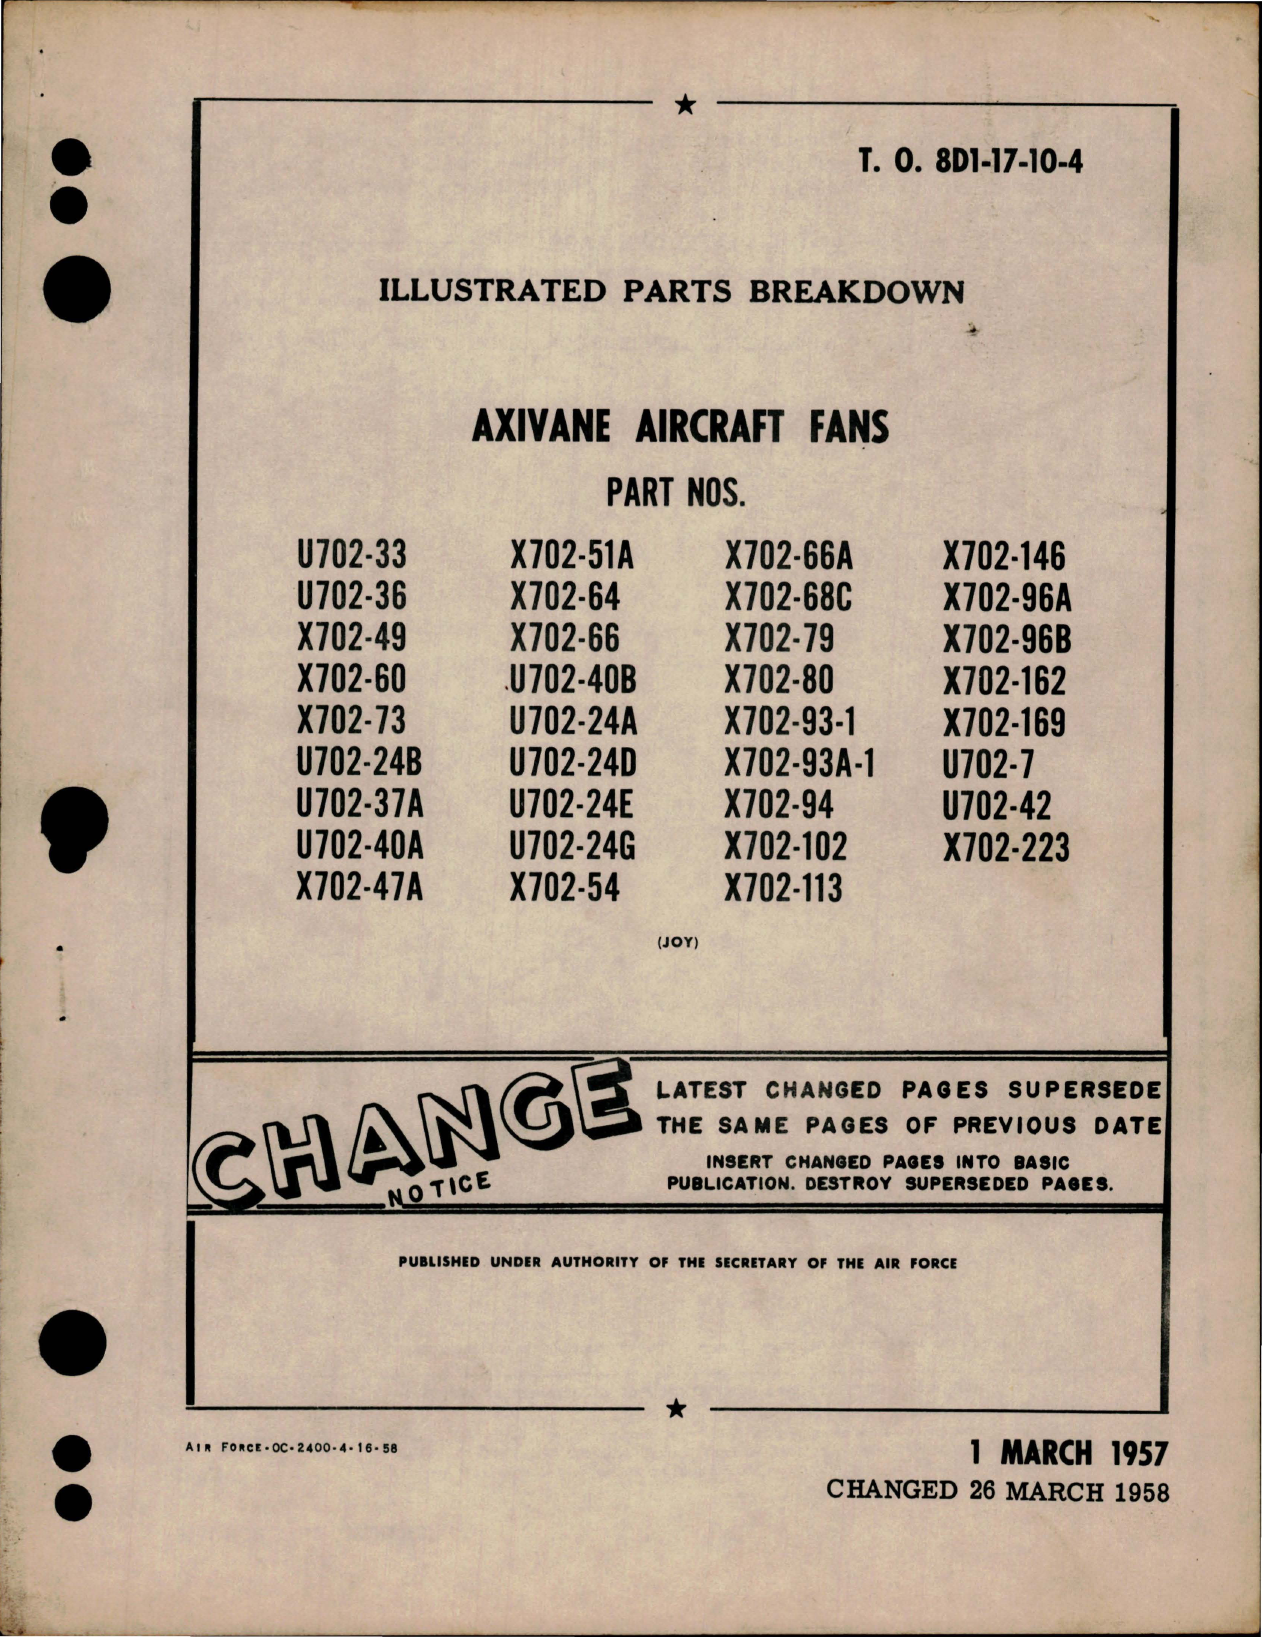 Sample page 1 from AirCorps Library document: Illustrated Parts Breakdown for Axivane Aircraft Fans - Parts U702 and X702 Series 